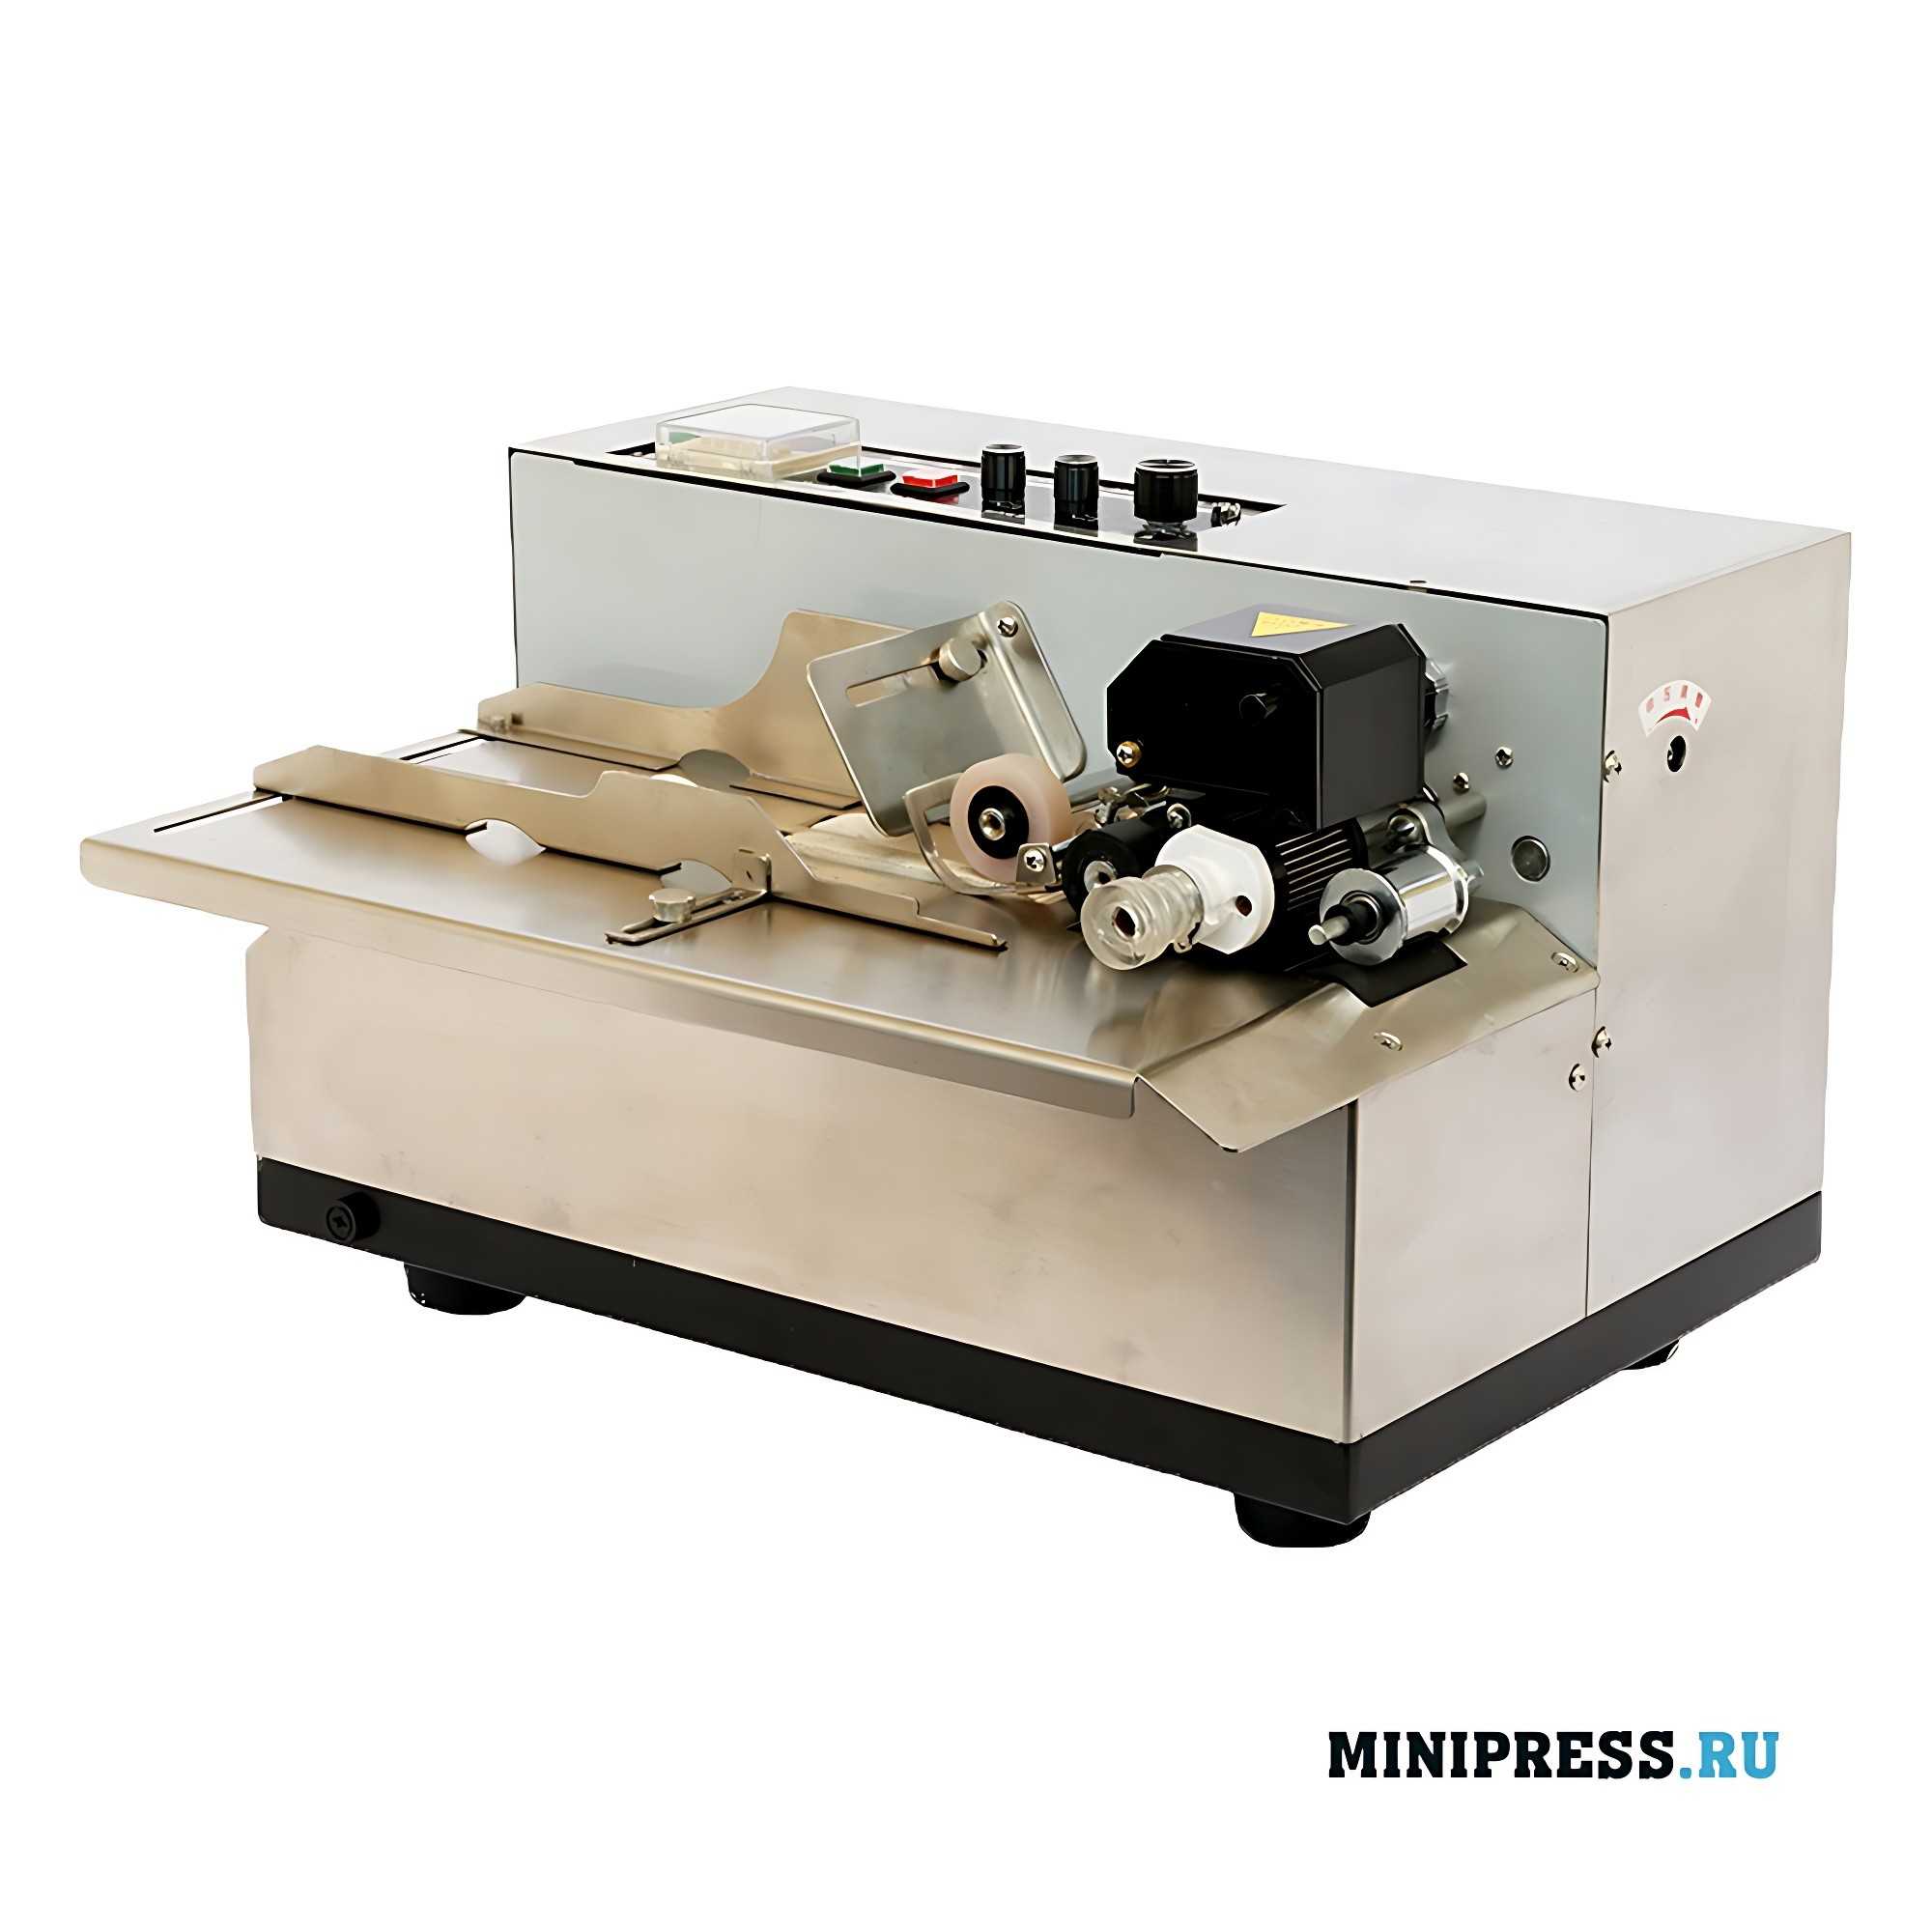 Coding Marking Machine with Ink Roller NPE 10